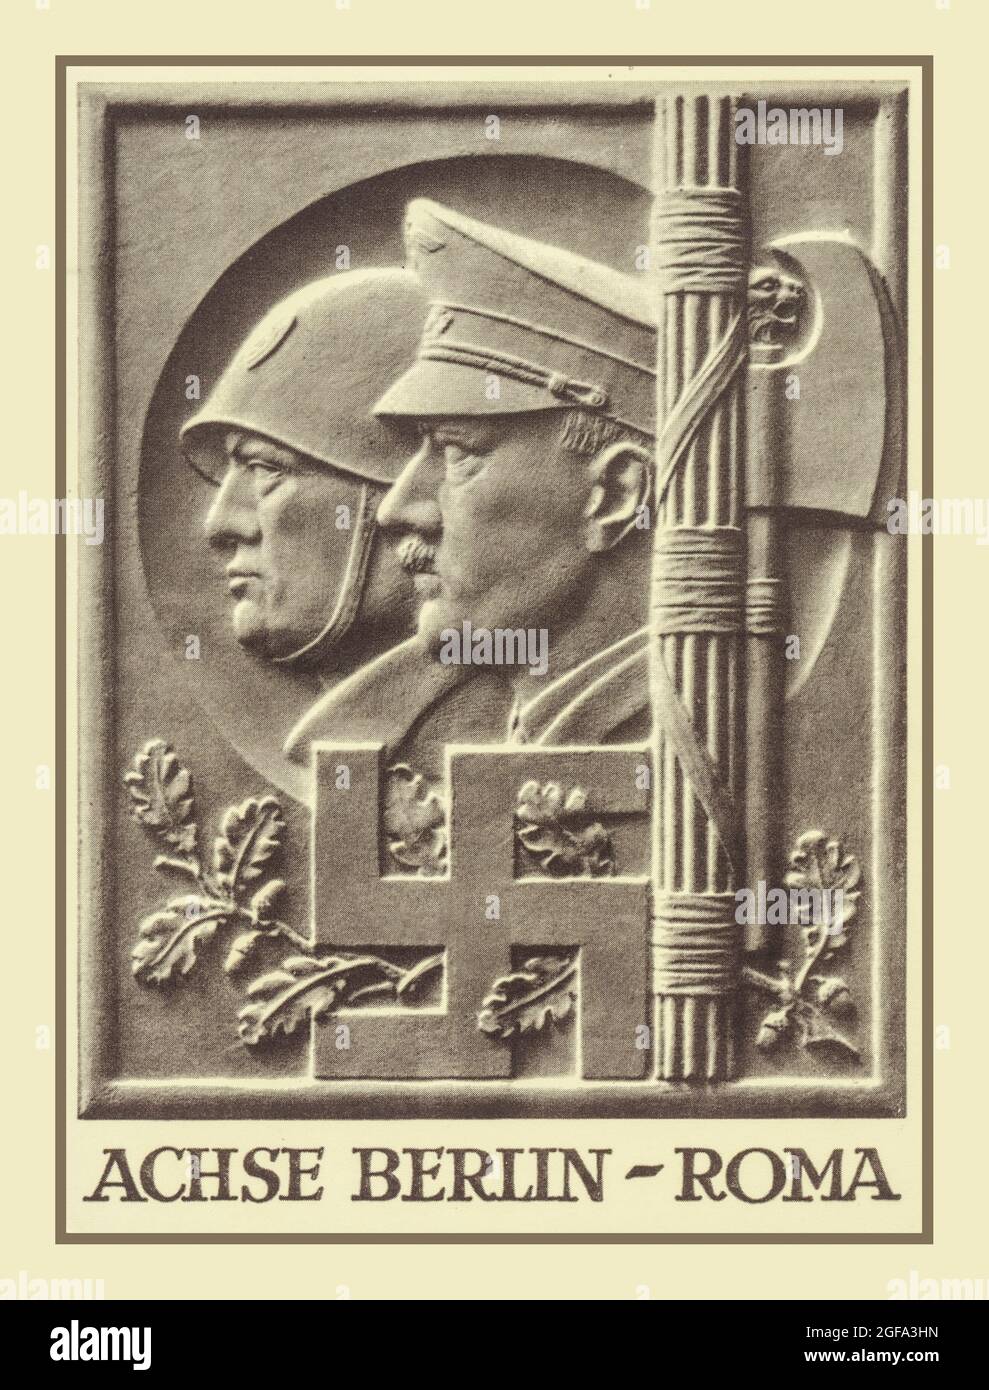 ACHSE BERLIN-ROMA 'AXIS BERLIN -ROME' Vintage archive poster card Adolf Hitler and Benito Mussolini celebrating the close Nazi Germany and Facist Italy relationship World War II WW2 Stock Photo